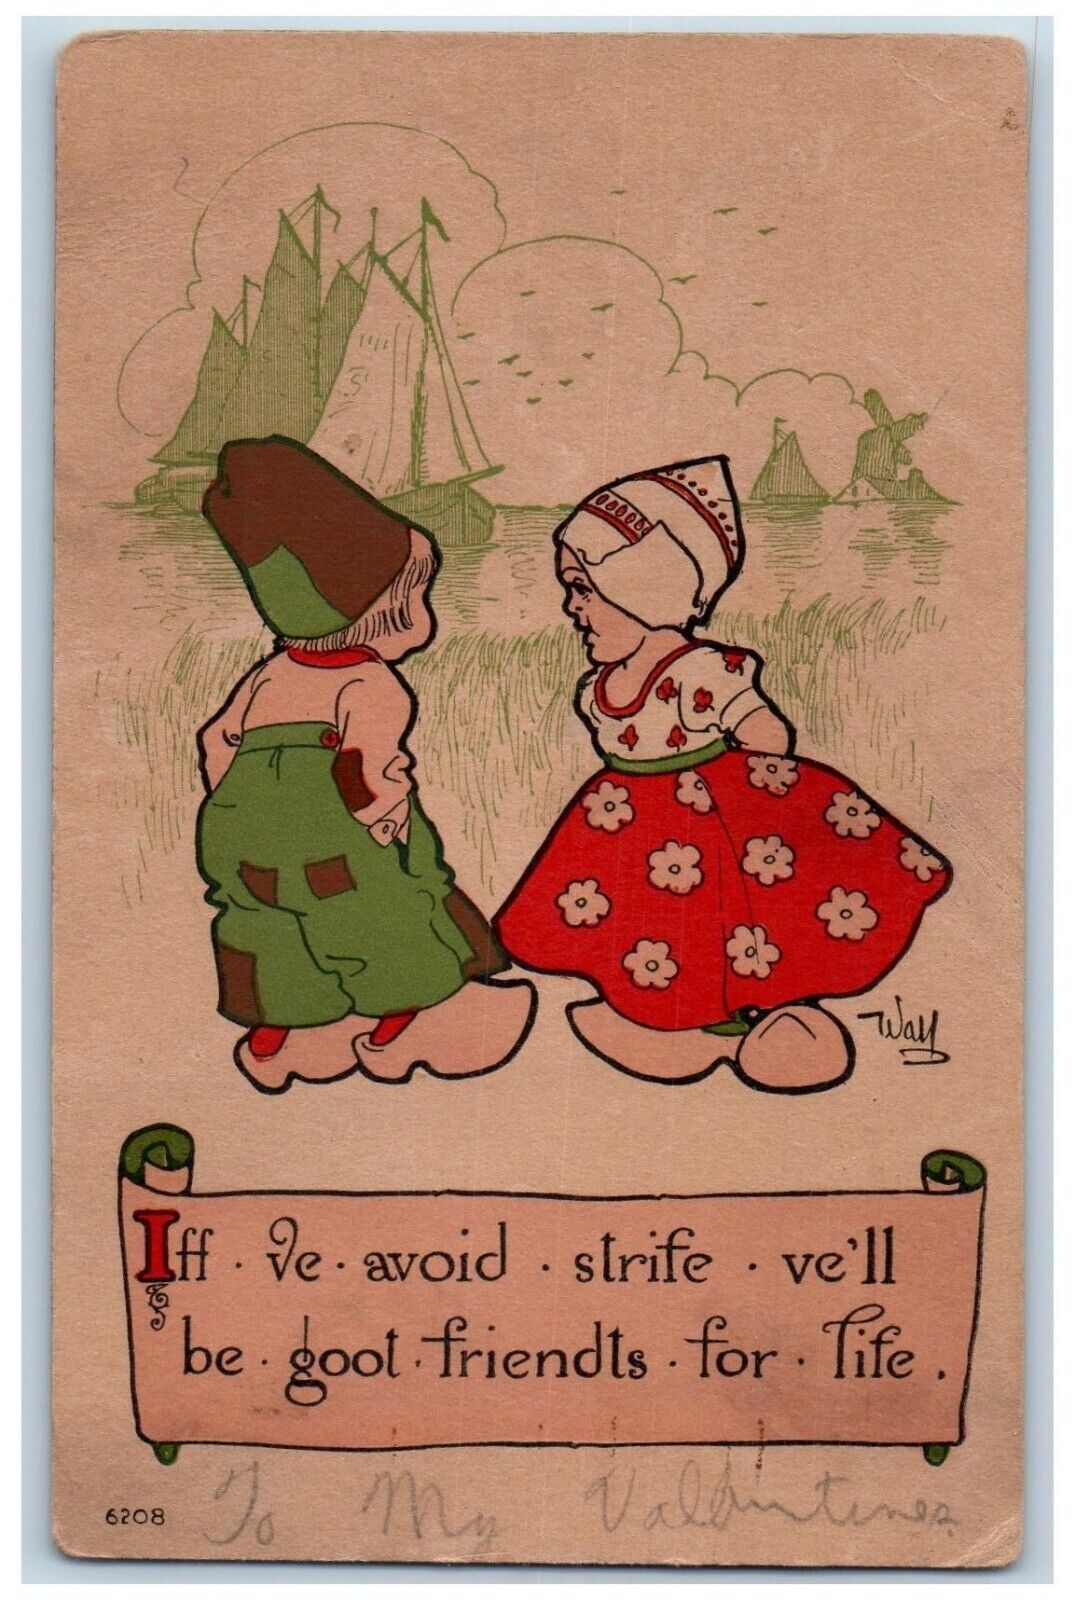 Wall Signed Postcard Boats Dutch Kids Iff Ve Avoid Strife Ve'll Be Goot Friendts